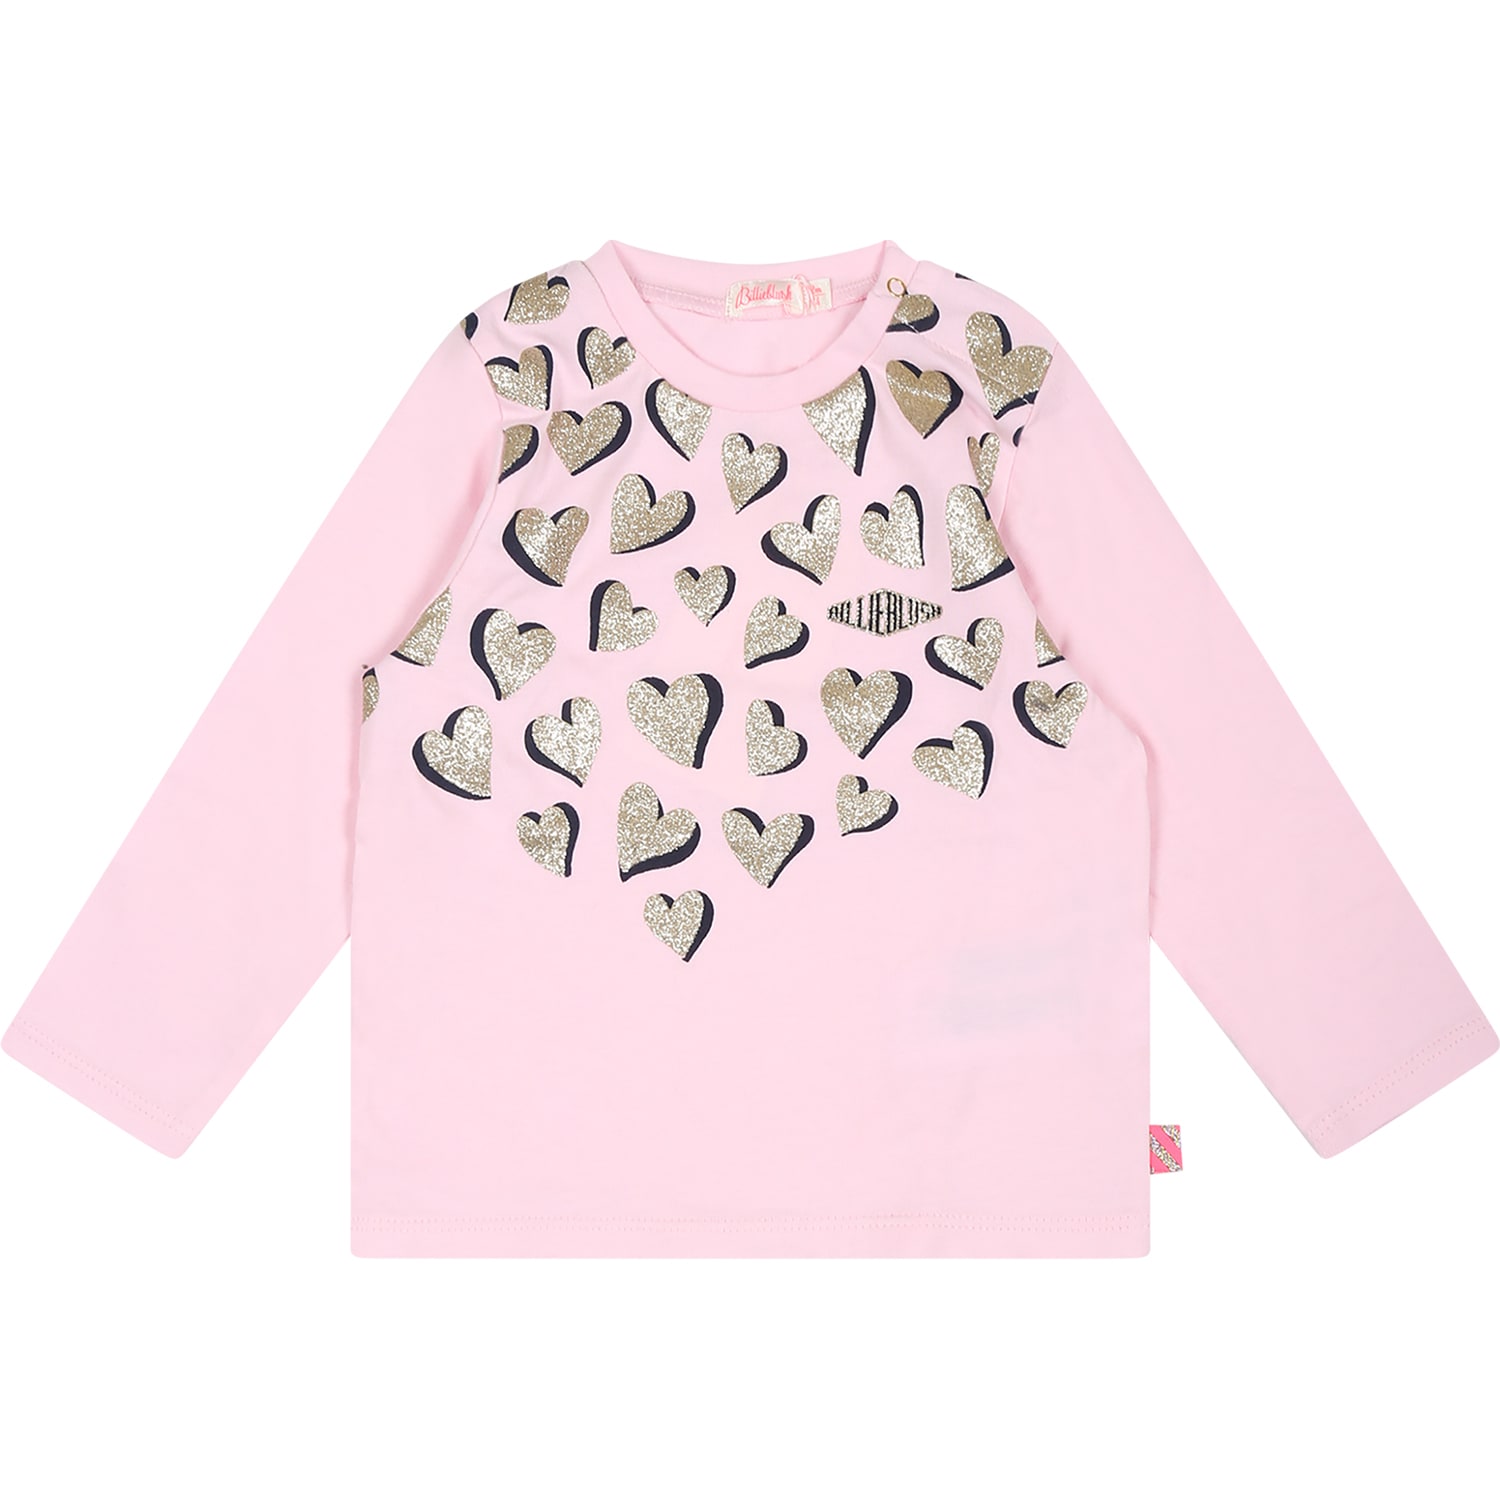 Billieblush Pink T-shirt For Baby Girl With Hearts